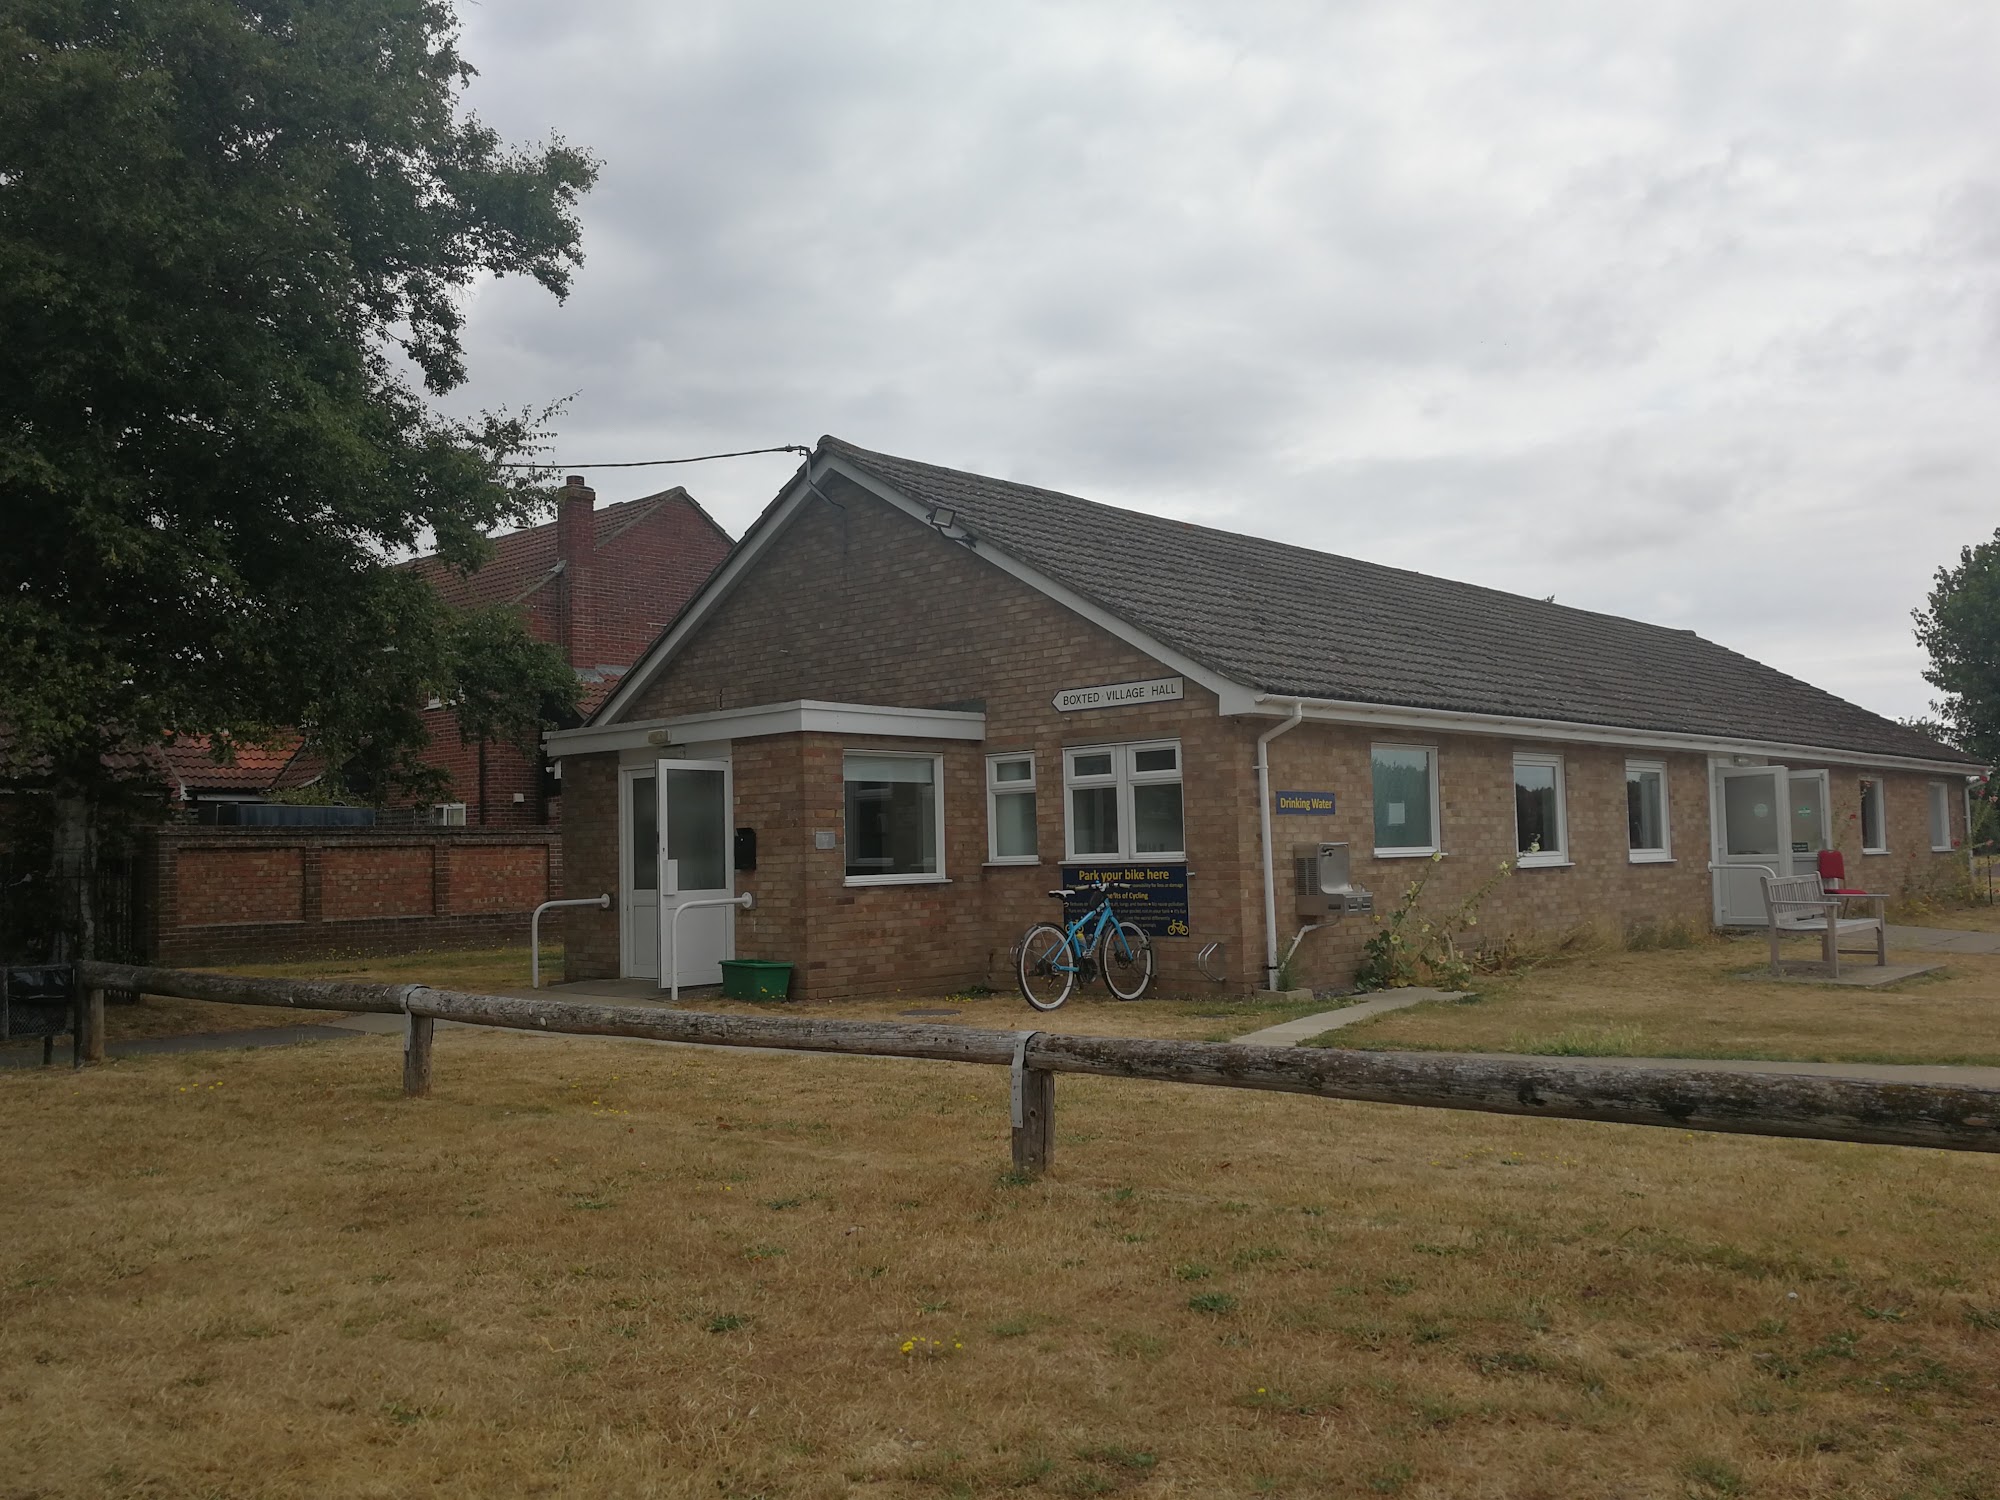 The Boxted Community Hub